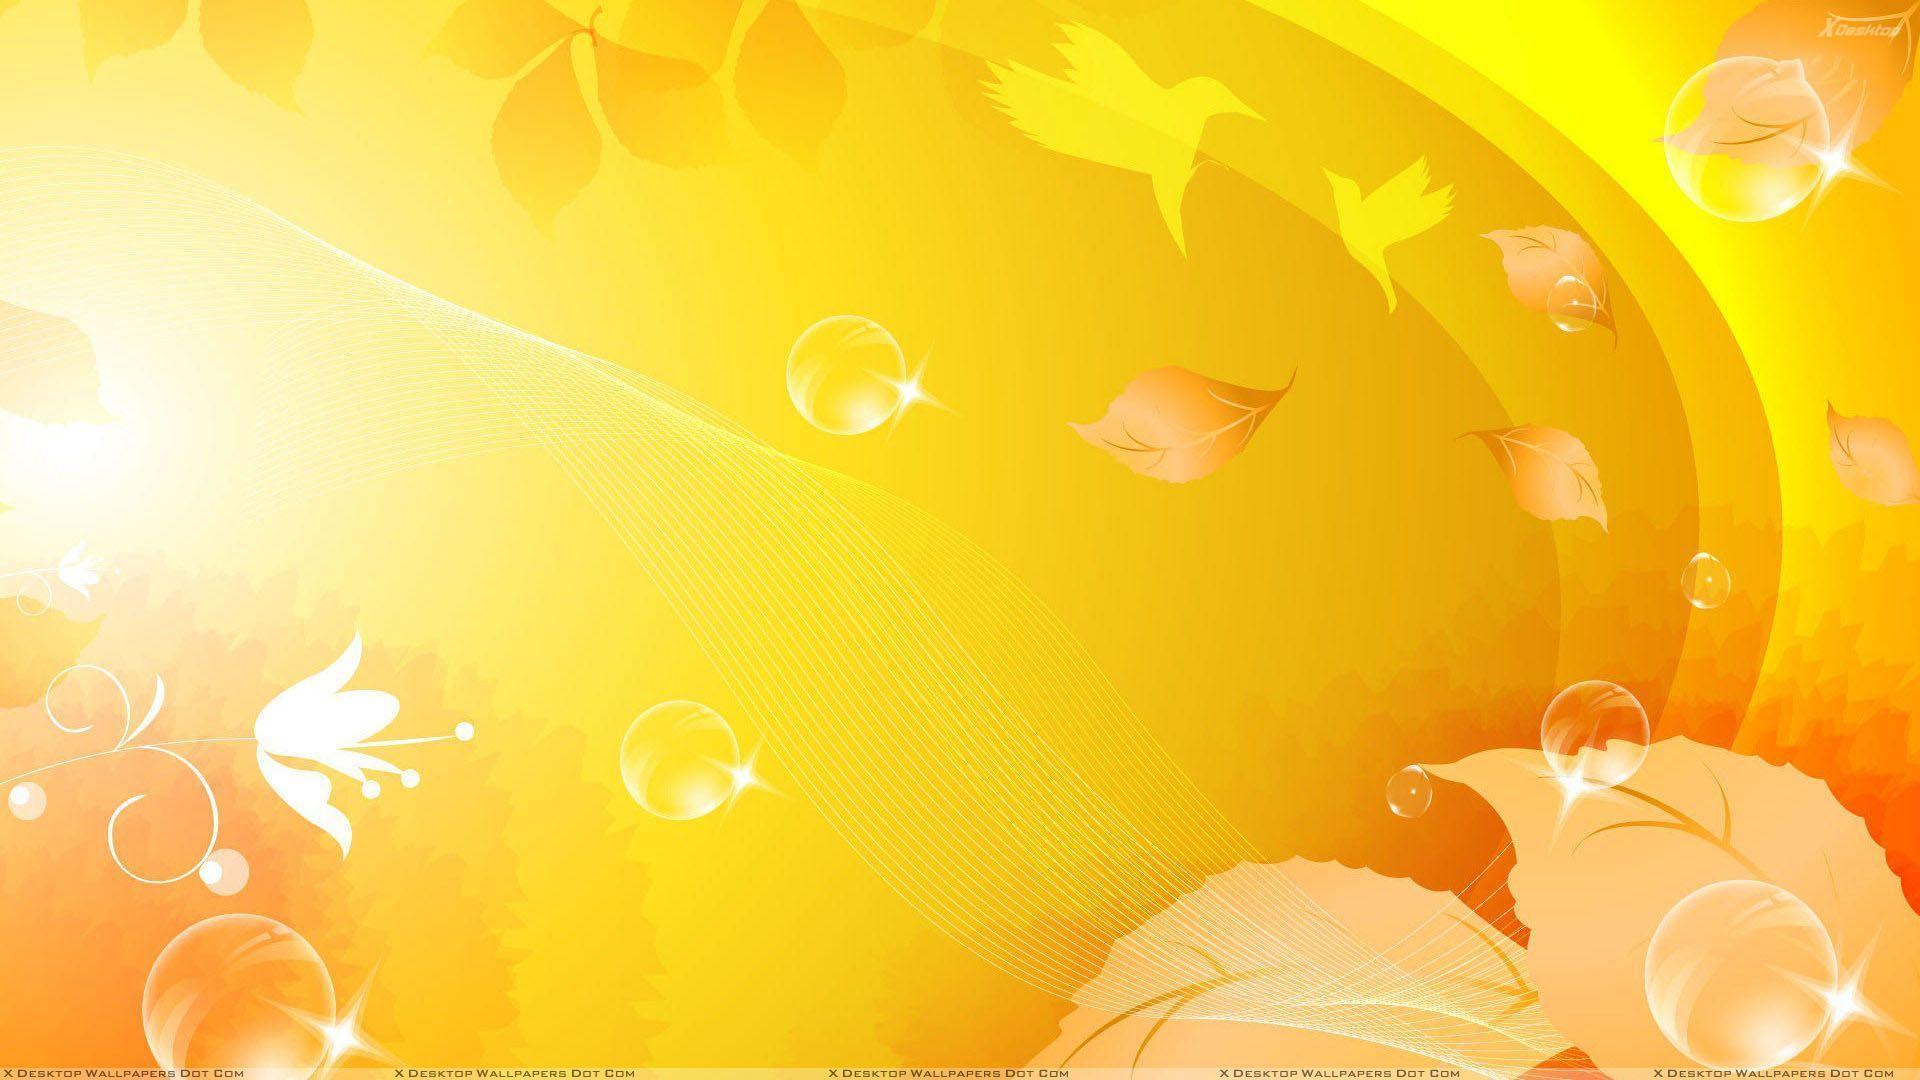 Wallpaper For > Wallpaper Background Yellow